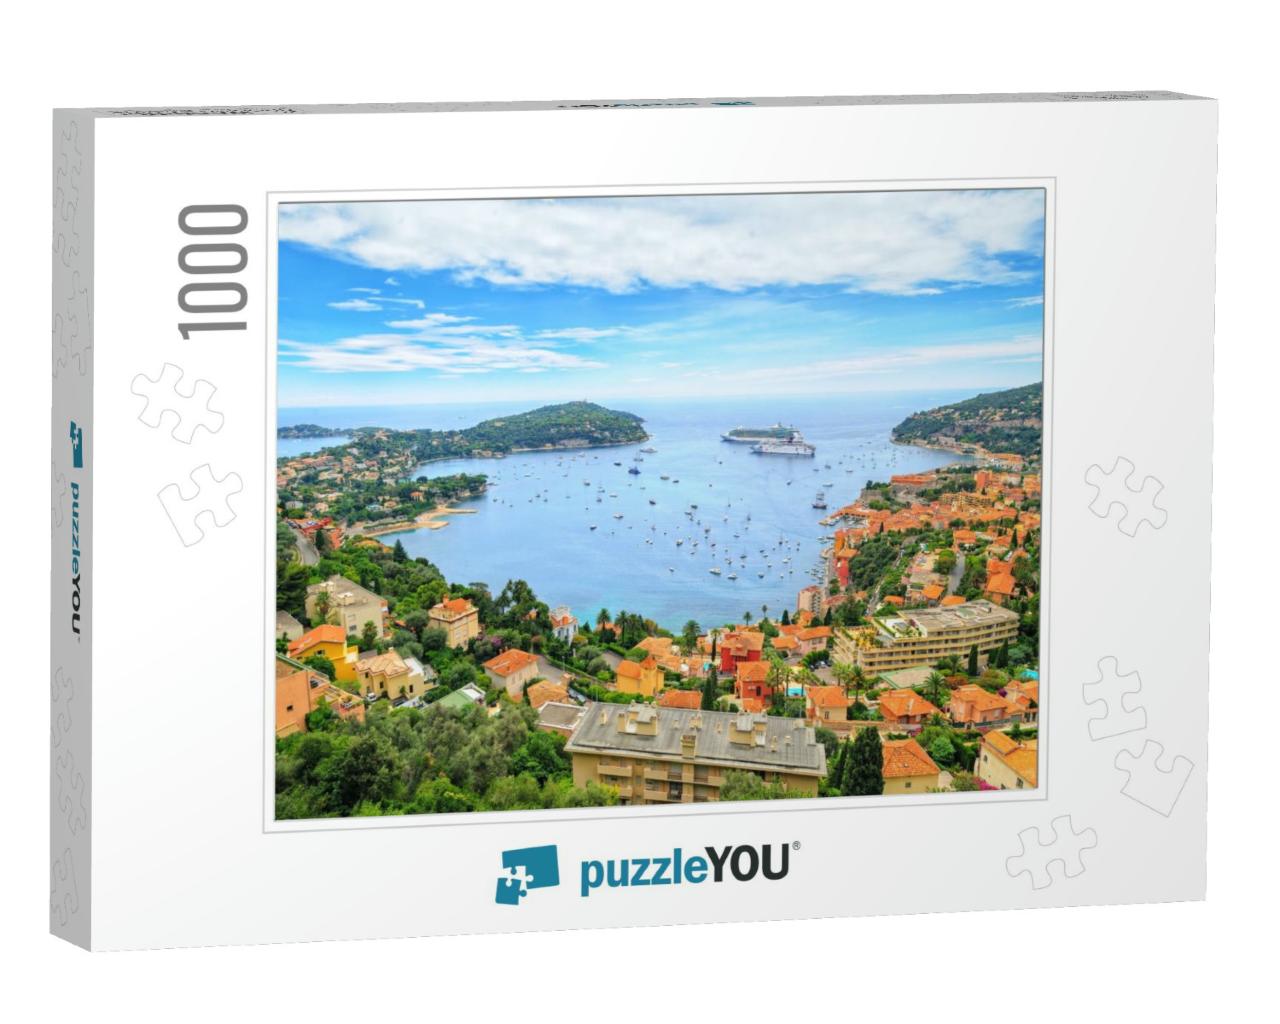 Cote Dazur by Nice, France... Jigsaw Puzzle with 1000 pieces